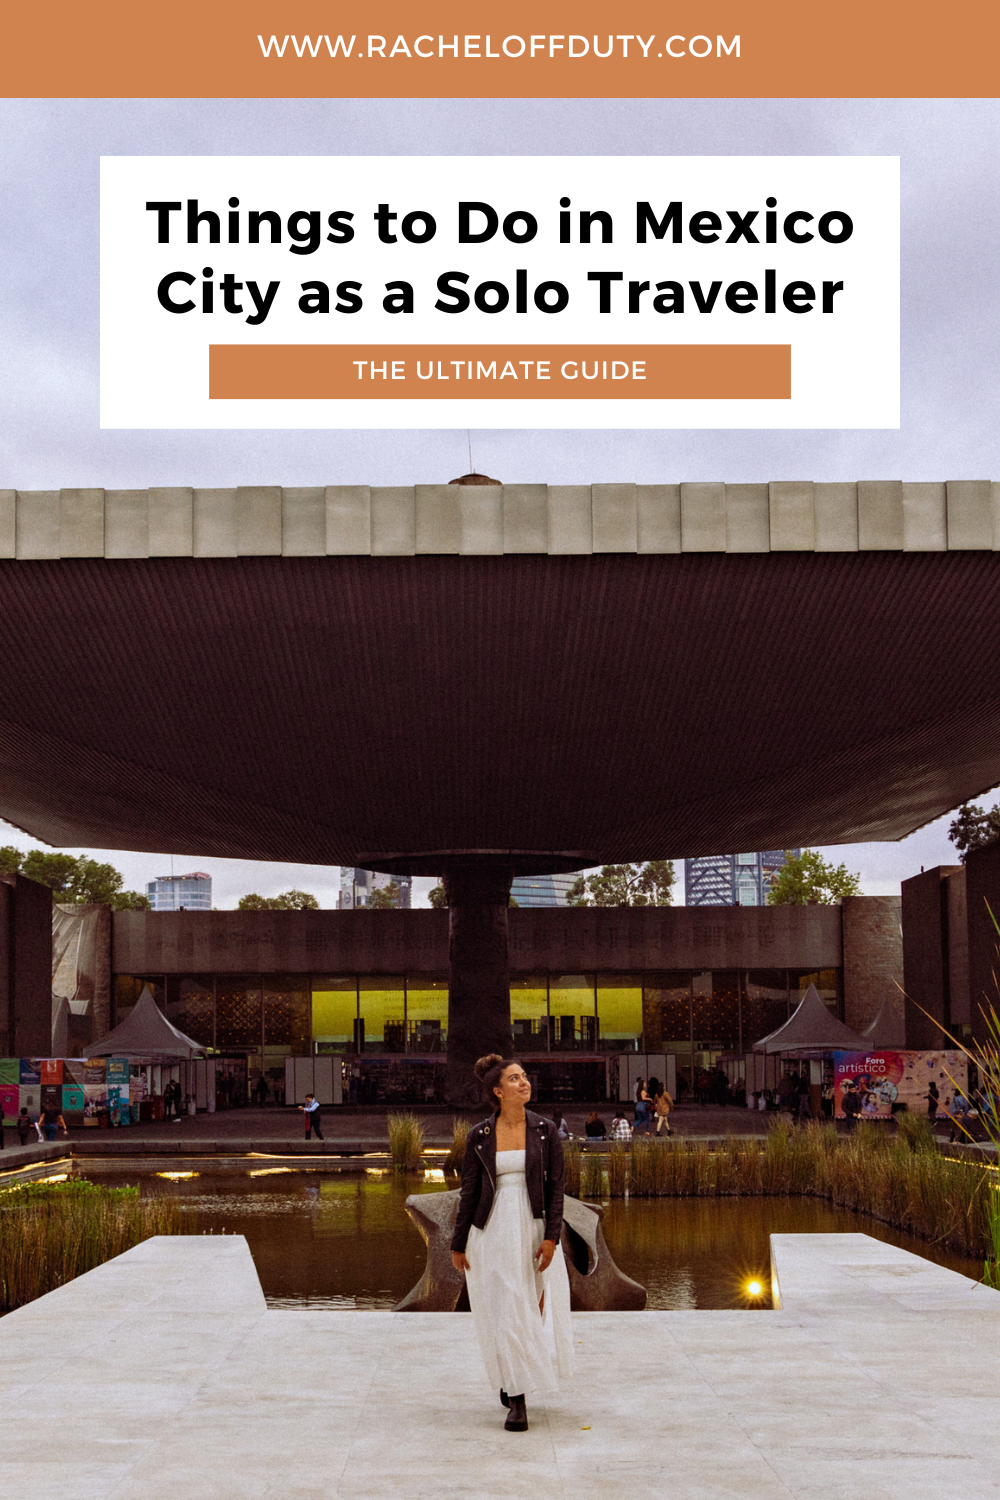 Things to Do in Mexico City Solo – Rachel Off Duty